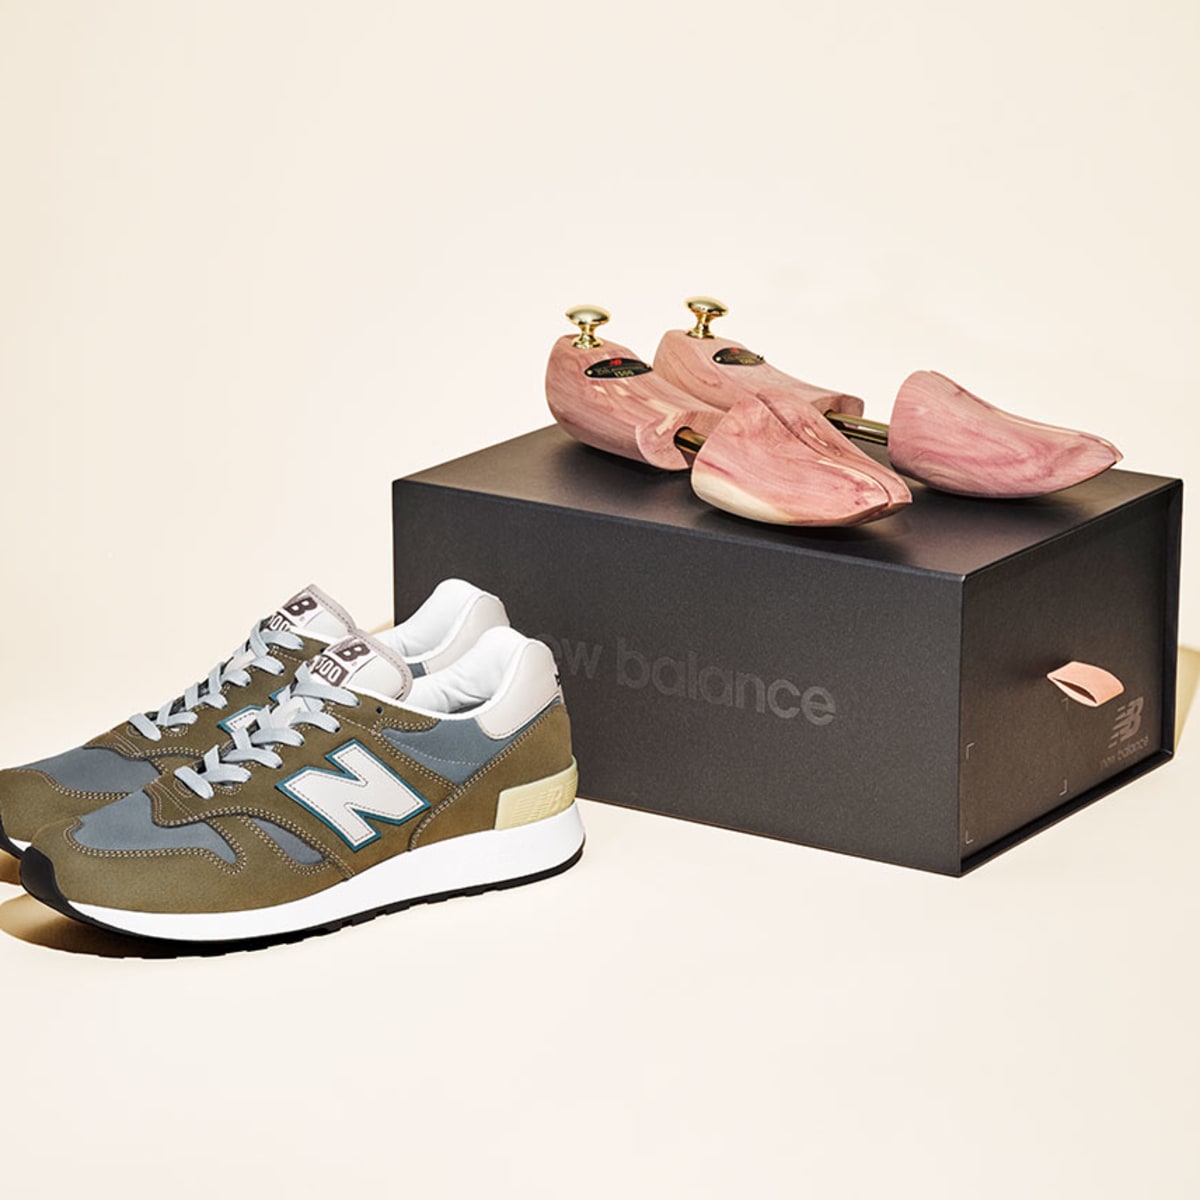 Excremento Polar nacido New Balance's Made in Japan M1300 is the pinnacle of sneaker craftsmanship  - Acquire